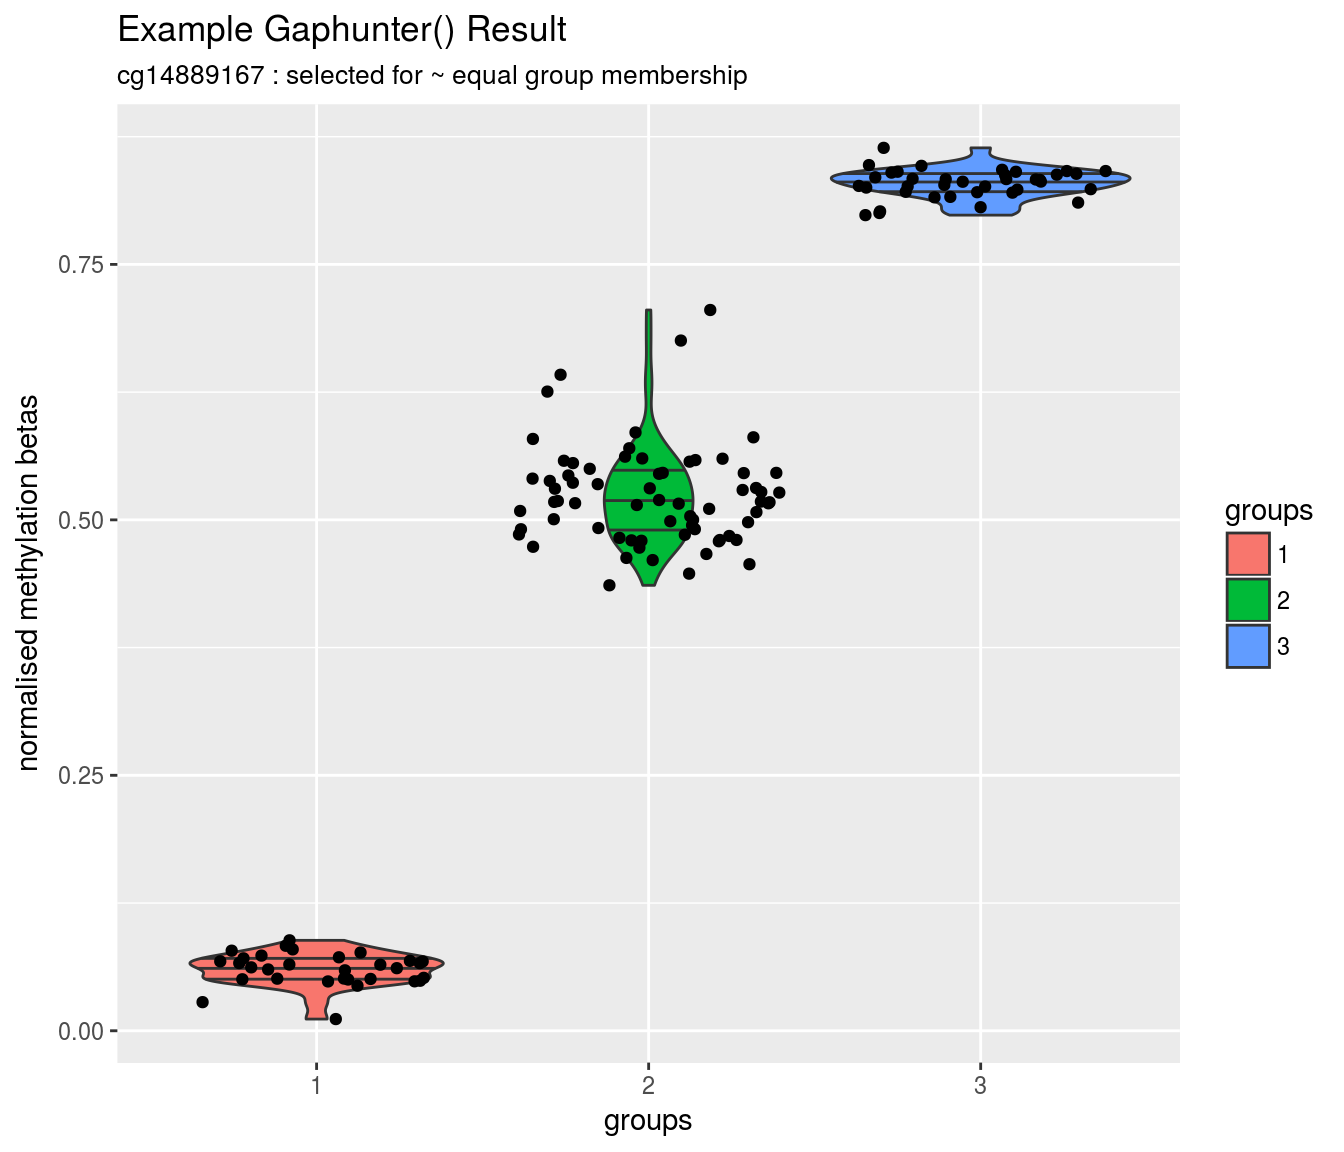 An example of the DNAm distribution for a result from the gaphunter() function. This is an example chosen to best exemplify the sort of result which is strongly suggestive of a genetic variant with an impact on methylation status acting on this site. It is unrepresentative of typical results from gaphunter() in that the groups have a relatively even membership, many results have a small number of individuals in one or more groups making it hard to distinguish methylation outliers caused by rarer genetic variants from those with other causes.